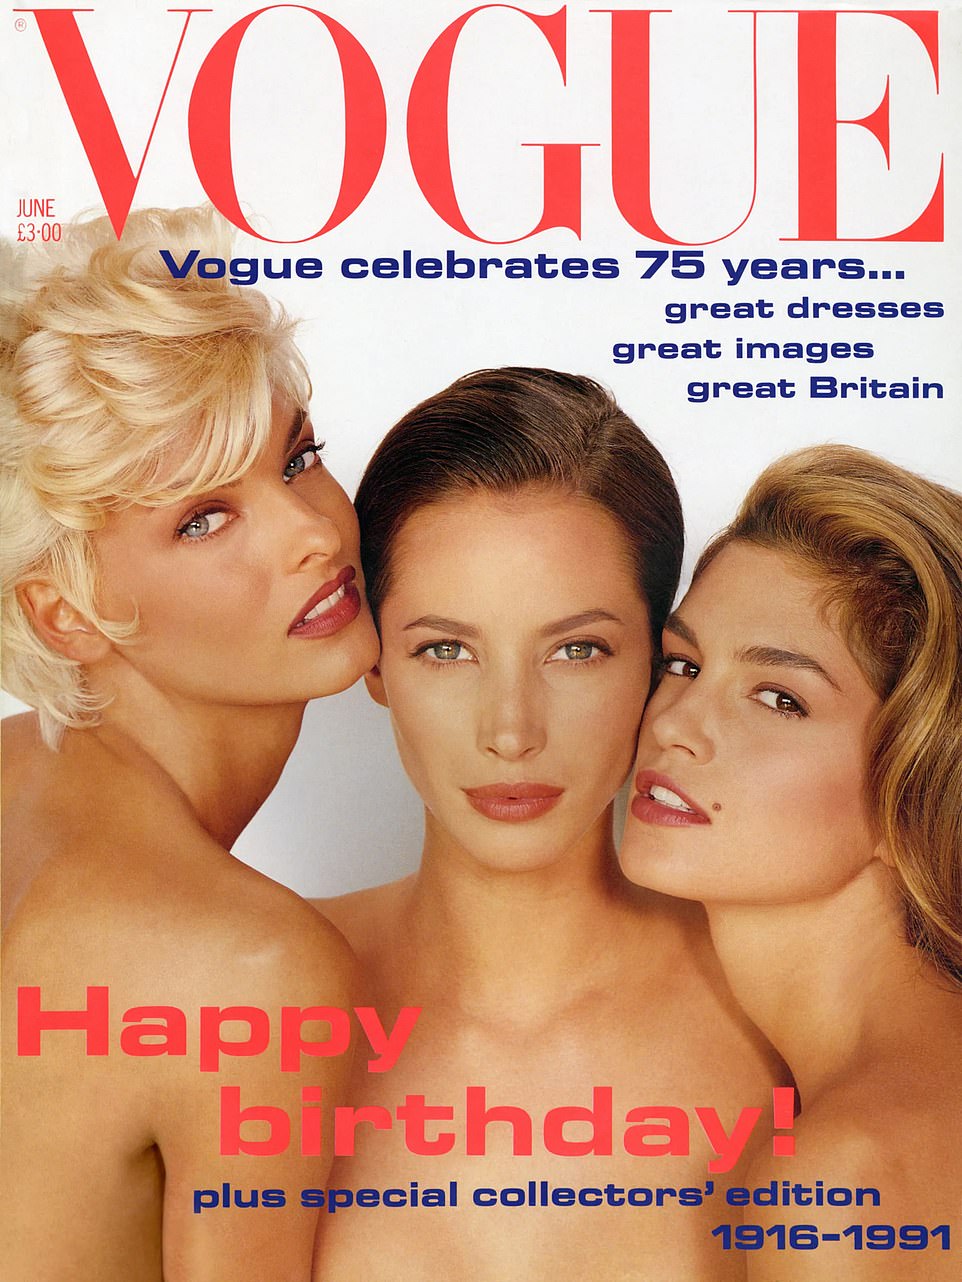 The couple appears on the cover of British Vogue in 1991 with supermodel Christy Turlington.